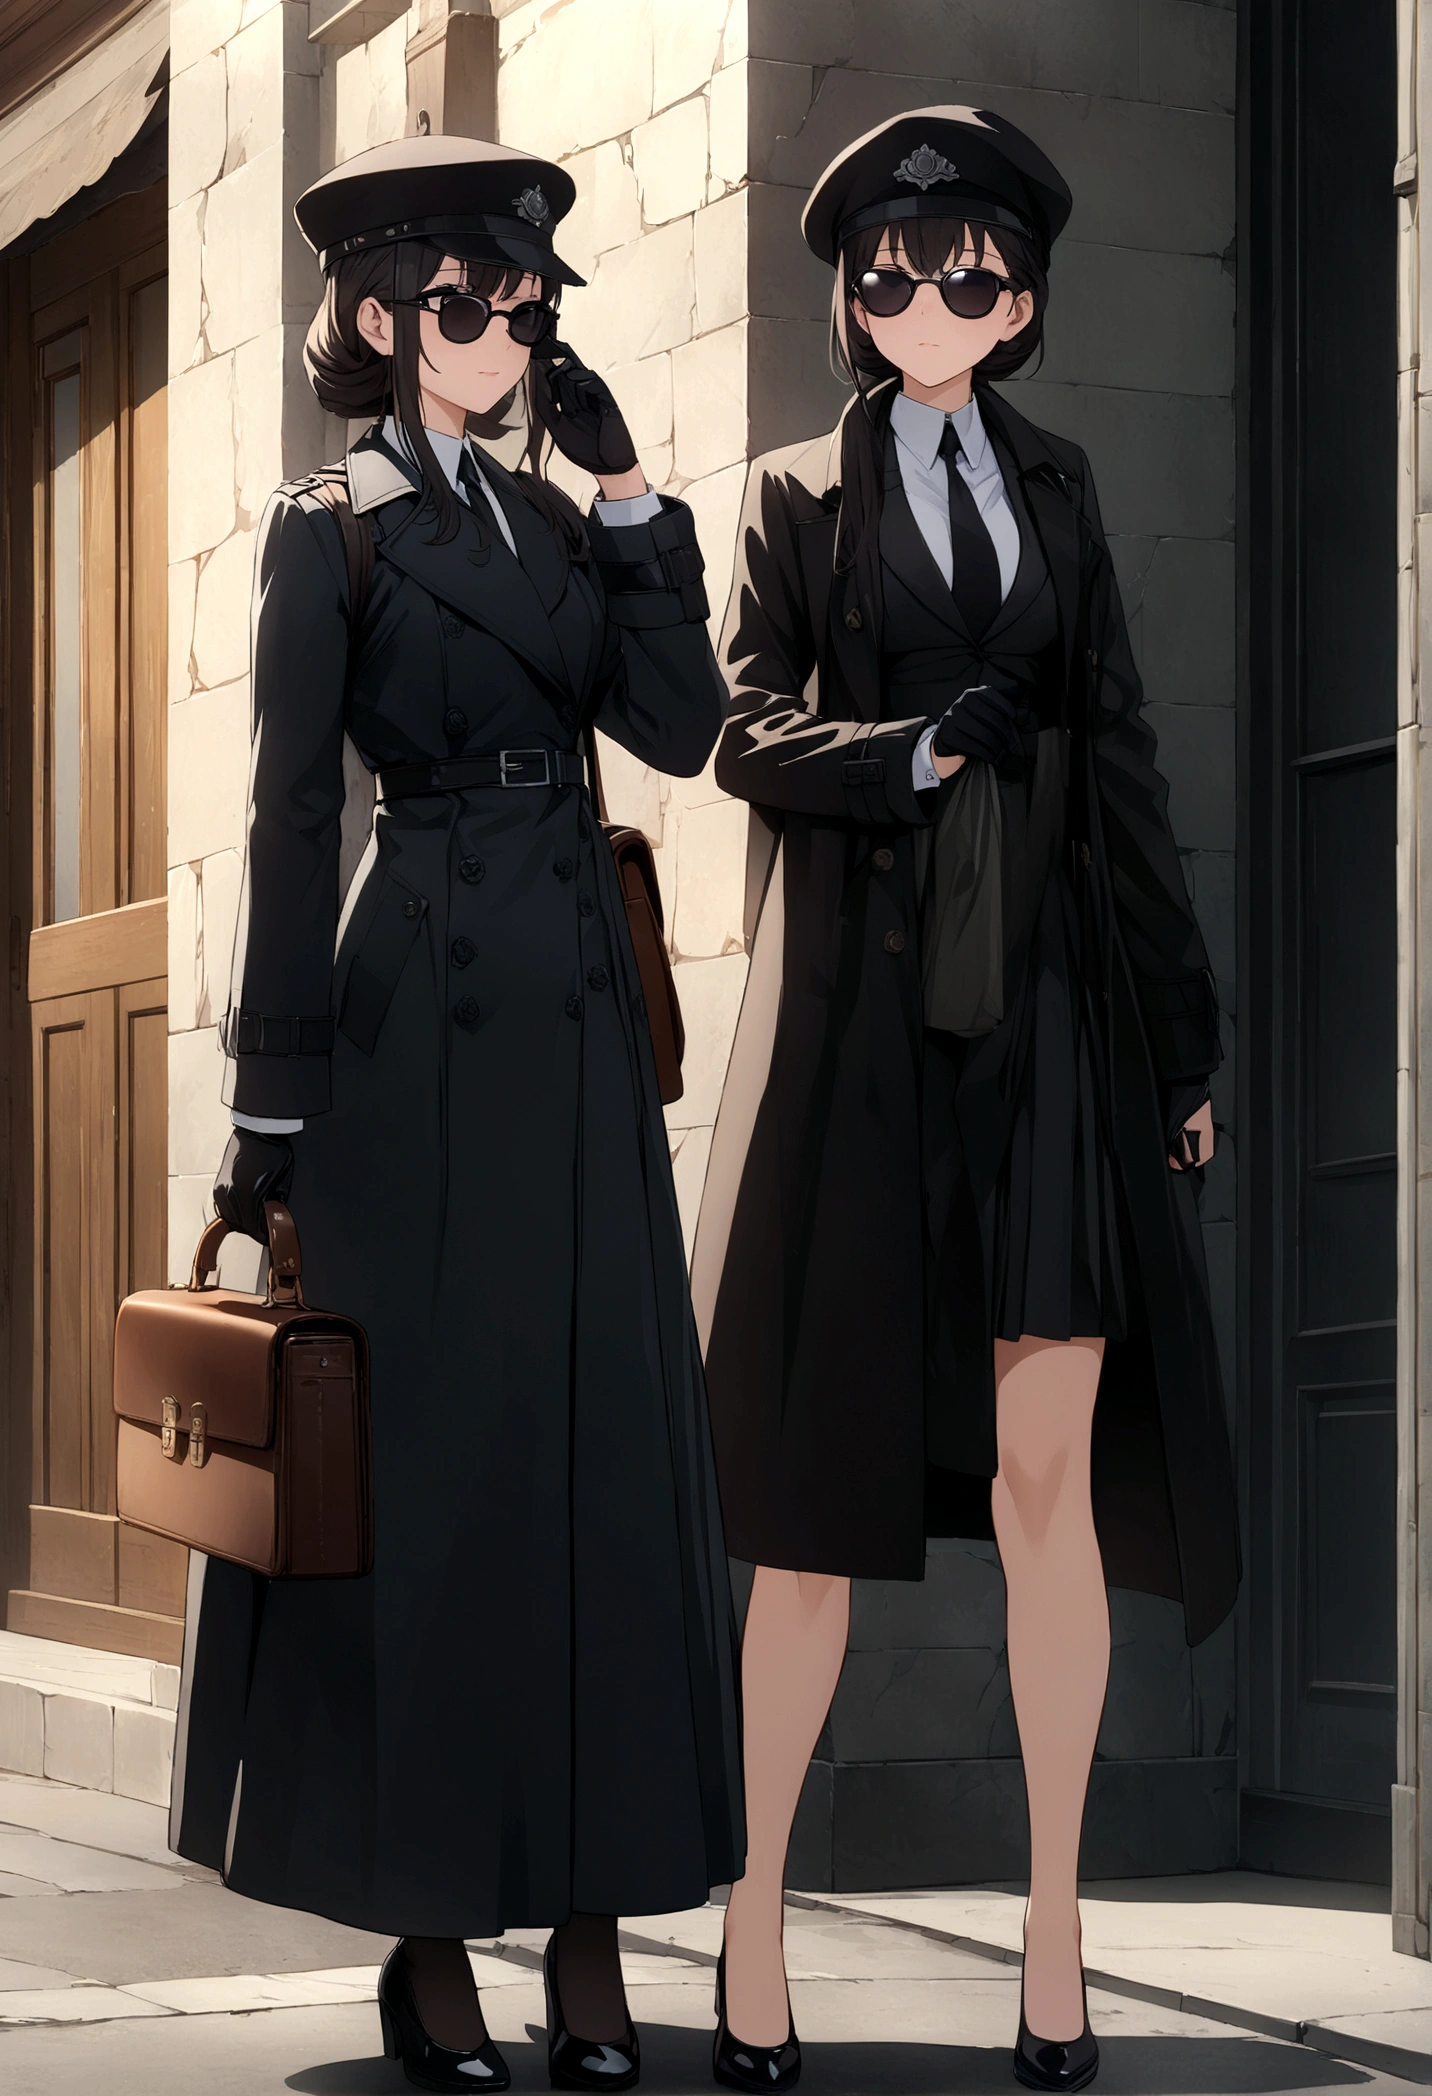 ((Masterpiece, top quality, high resolution)), ((highly detailed CG unified 8K wallpaper)), Screenshot from a spy movie, two women having a secret conversation on a street corner, wearing black hats, black sunglasses, black trench coats, black gloves, black shoes, holding an attache case and newspaper in one hand, HD,